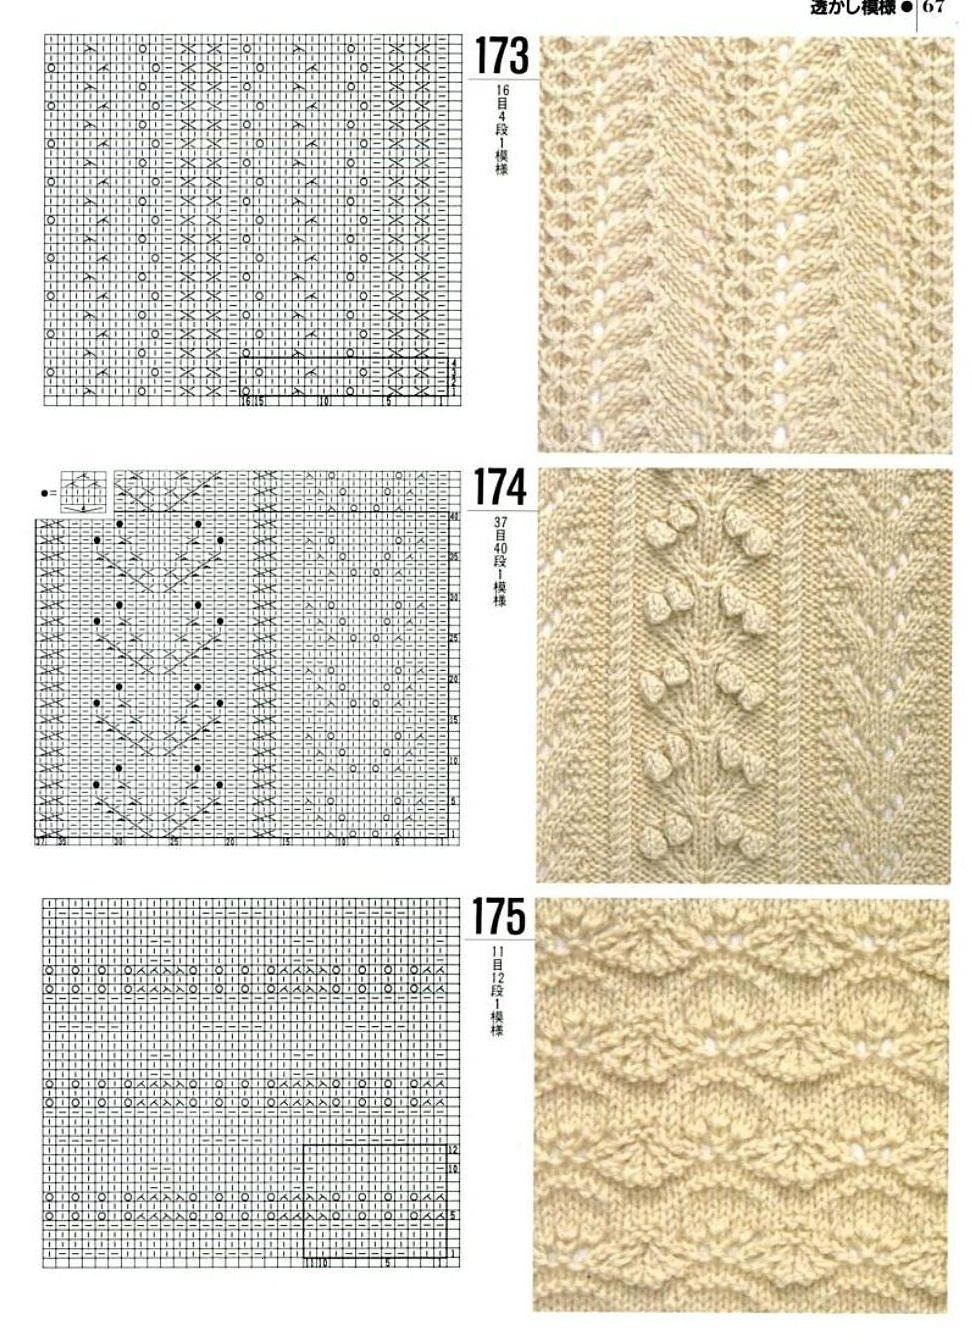 Patterns of patterns for knitting women's vests with knitting needles, example 10